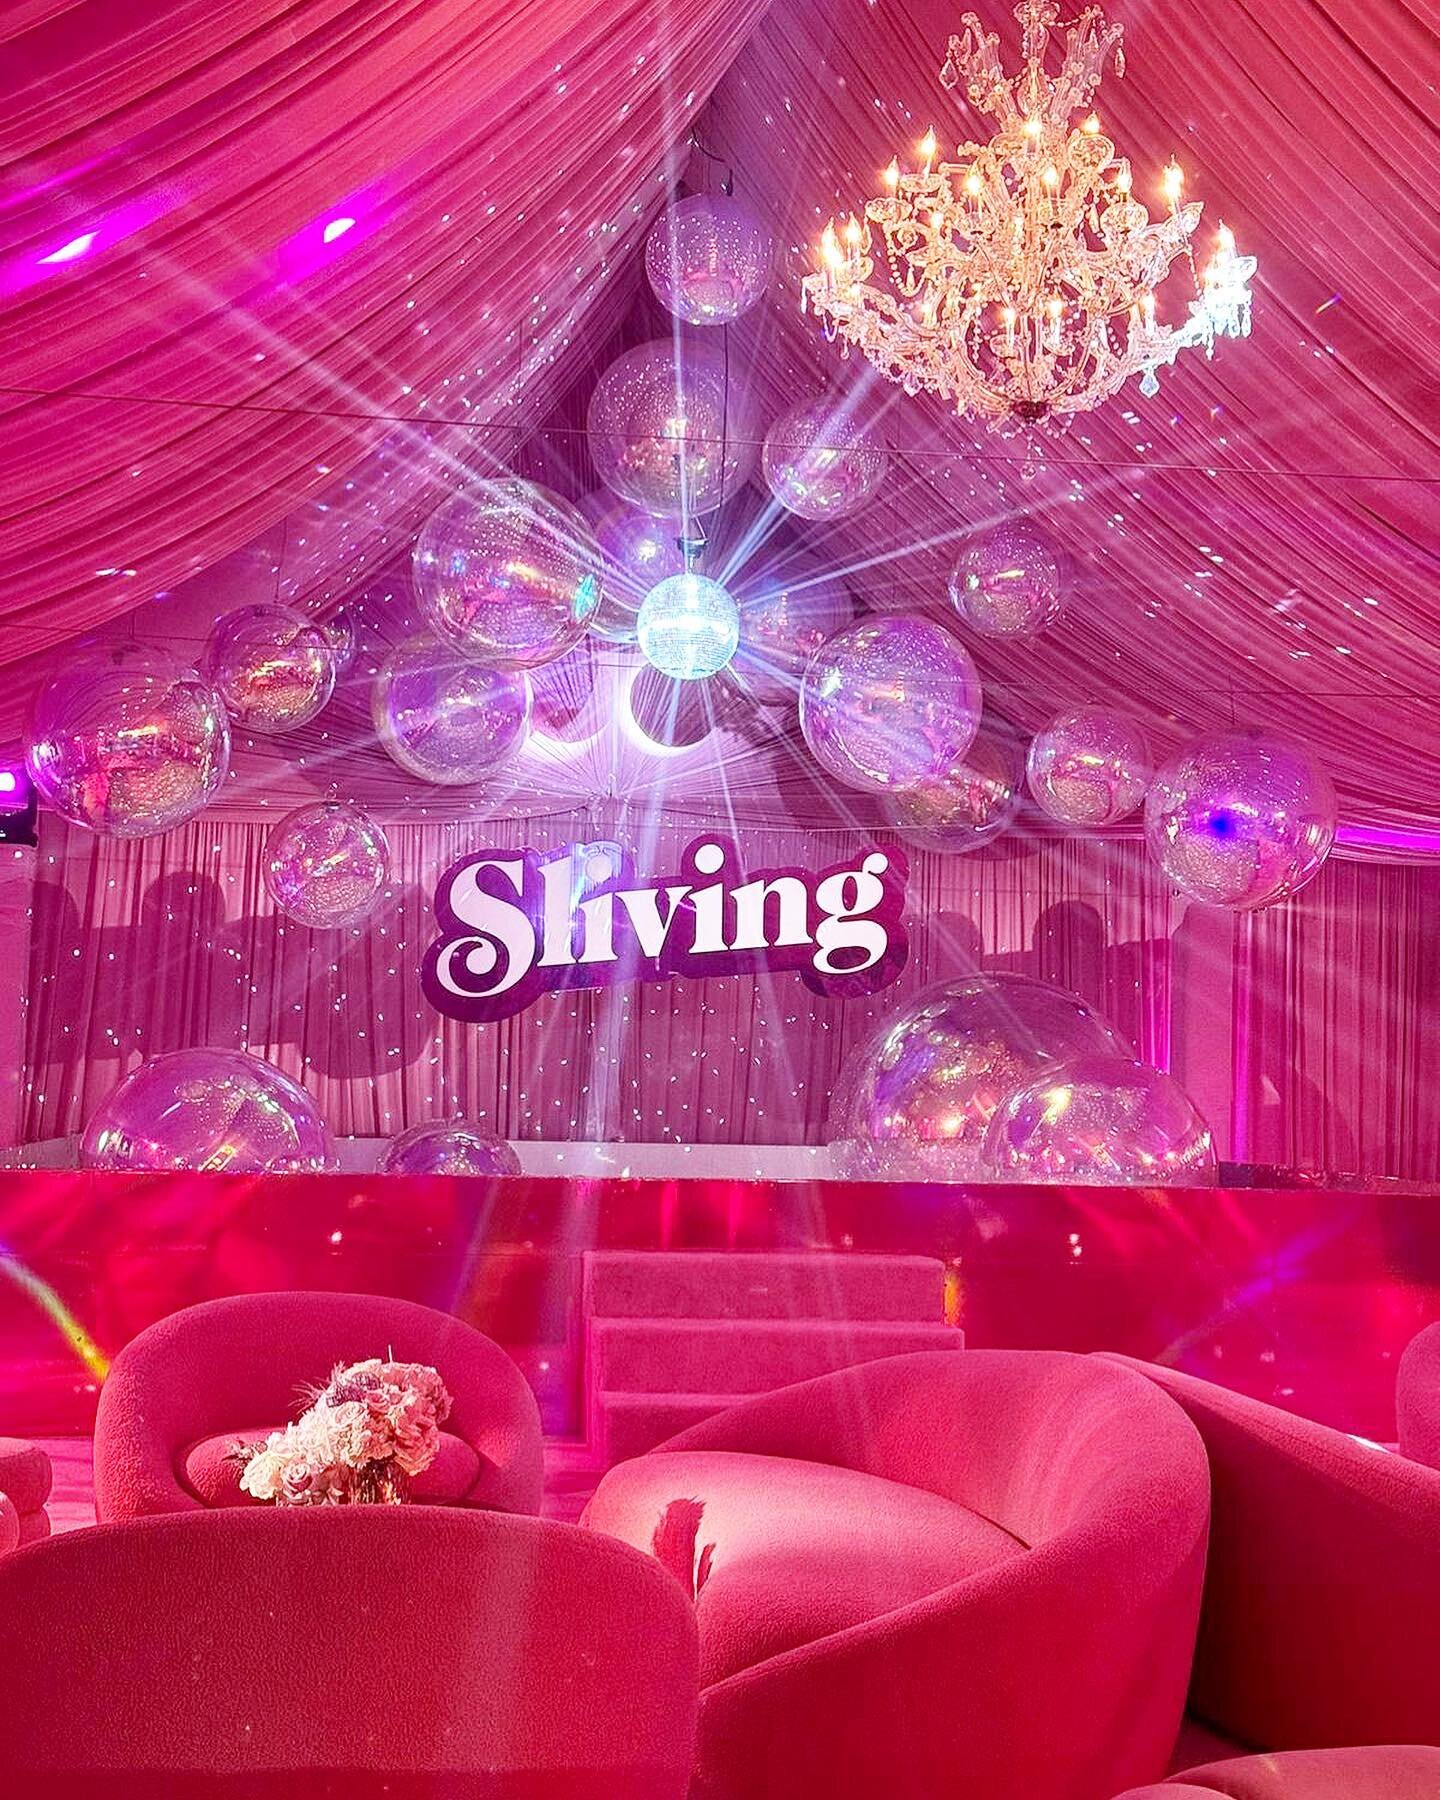 I am certainly not opposed to bringing the oversized, dramatic, custom built ball pits back! We have thousands of tiny balls here in the warehouse and they paired so perfectly with the @bigshinyballs overhead here for @parishilton. Birthday parties s